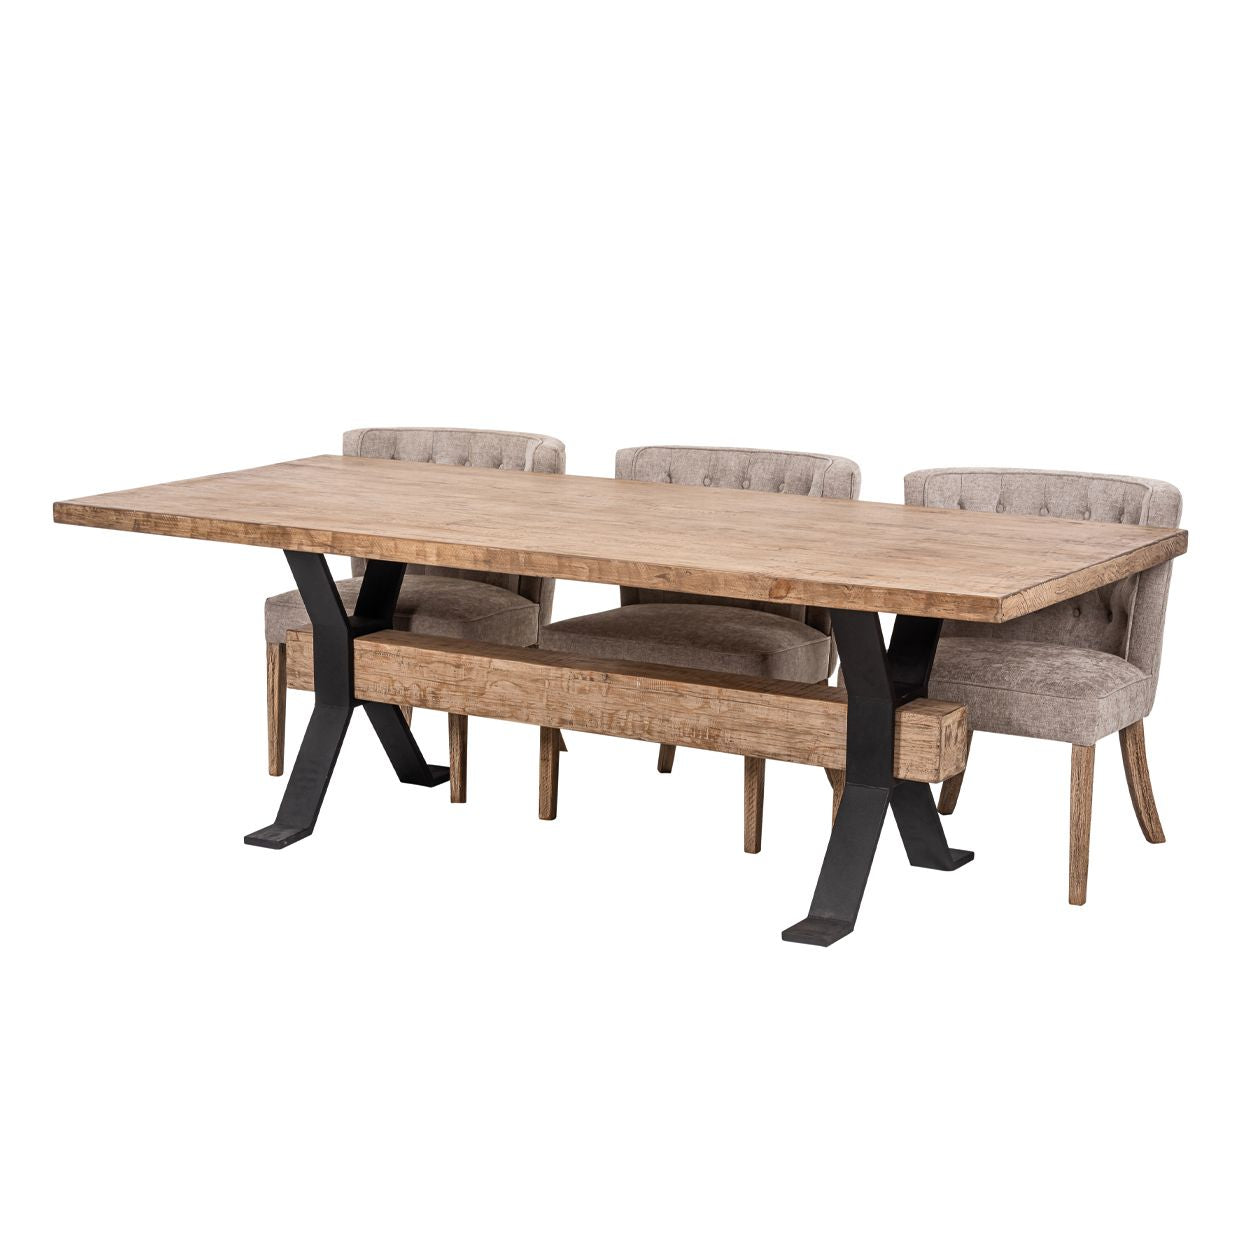 Standard Dining Table - Kingswood